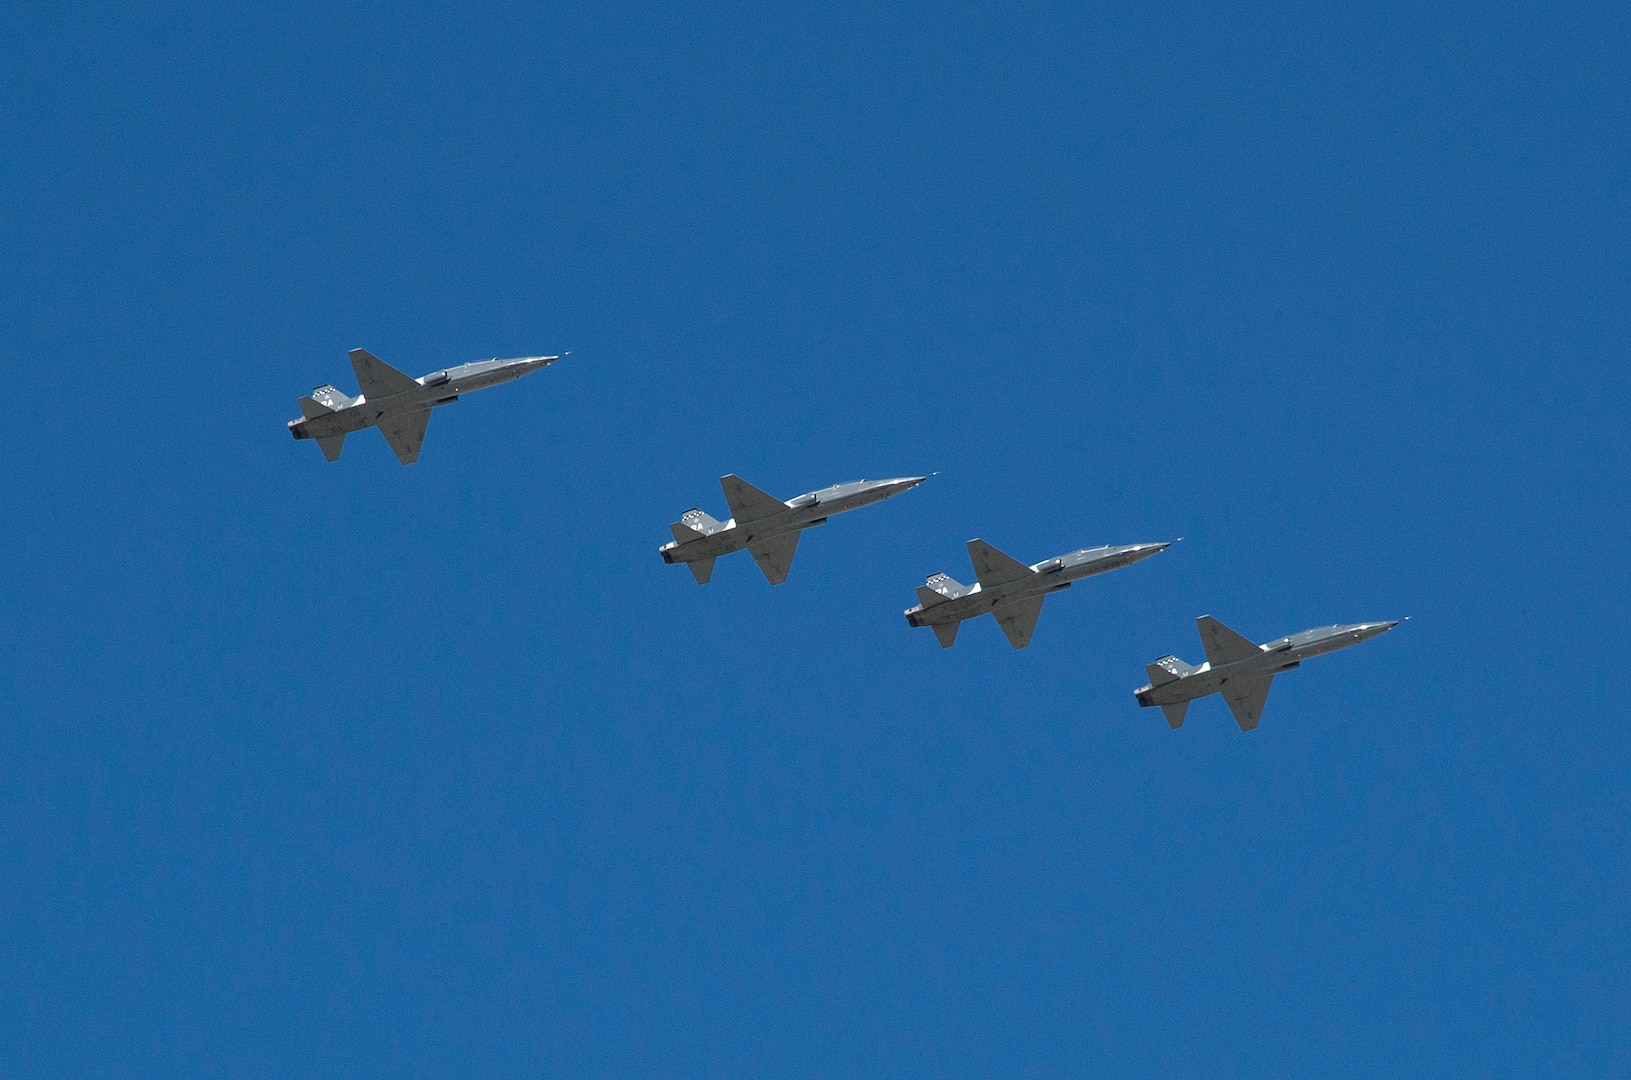 A formation of T-38C Talons flies over Joint Base San Antonio-Randolph Seguin Auxiliary Airfield during a ribbon cutting event signifying the reopening of the JBSA-Randolph Seguin Auxiliary Airfield Jan. 20.  Upon completion of a three-year construction project, the airfield is now ready for flying by members of the 560th Flying Training Squadron.  The airfield is crucial for “touch and go” training that qualifies fighter and bomber pilots as instructor pilots in the T-38C Talon.  The reconstructed runway increases flight safety by distributing training around the San Antonio area, which means fewer aircraft and less congestion around Joint Base San Antonio-Randolph. (U.S. Air Force photo by Johnny Saldivar)